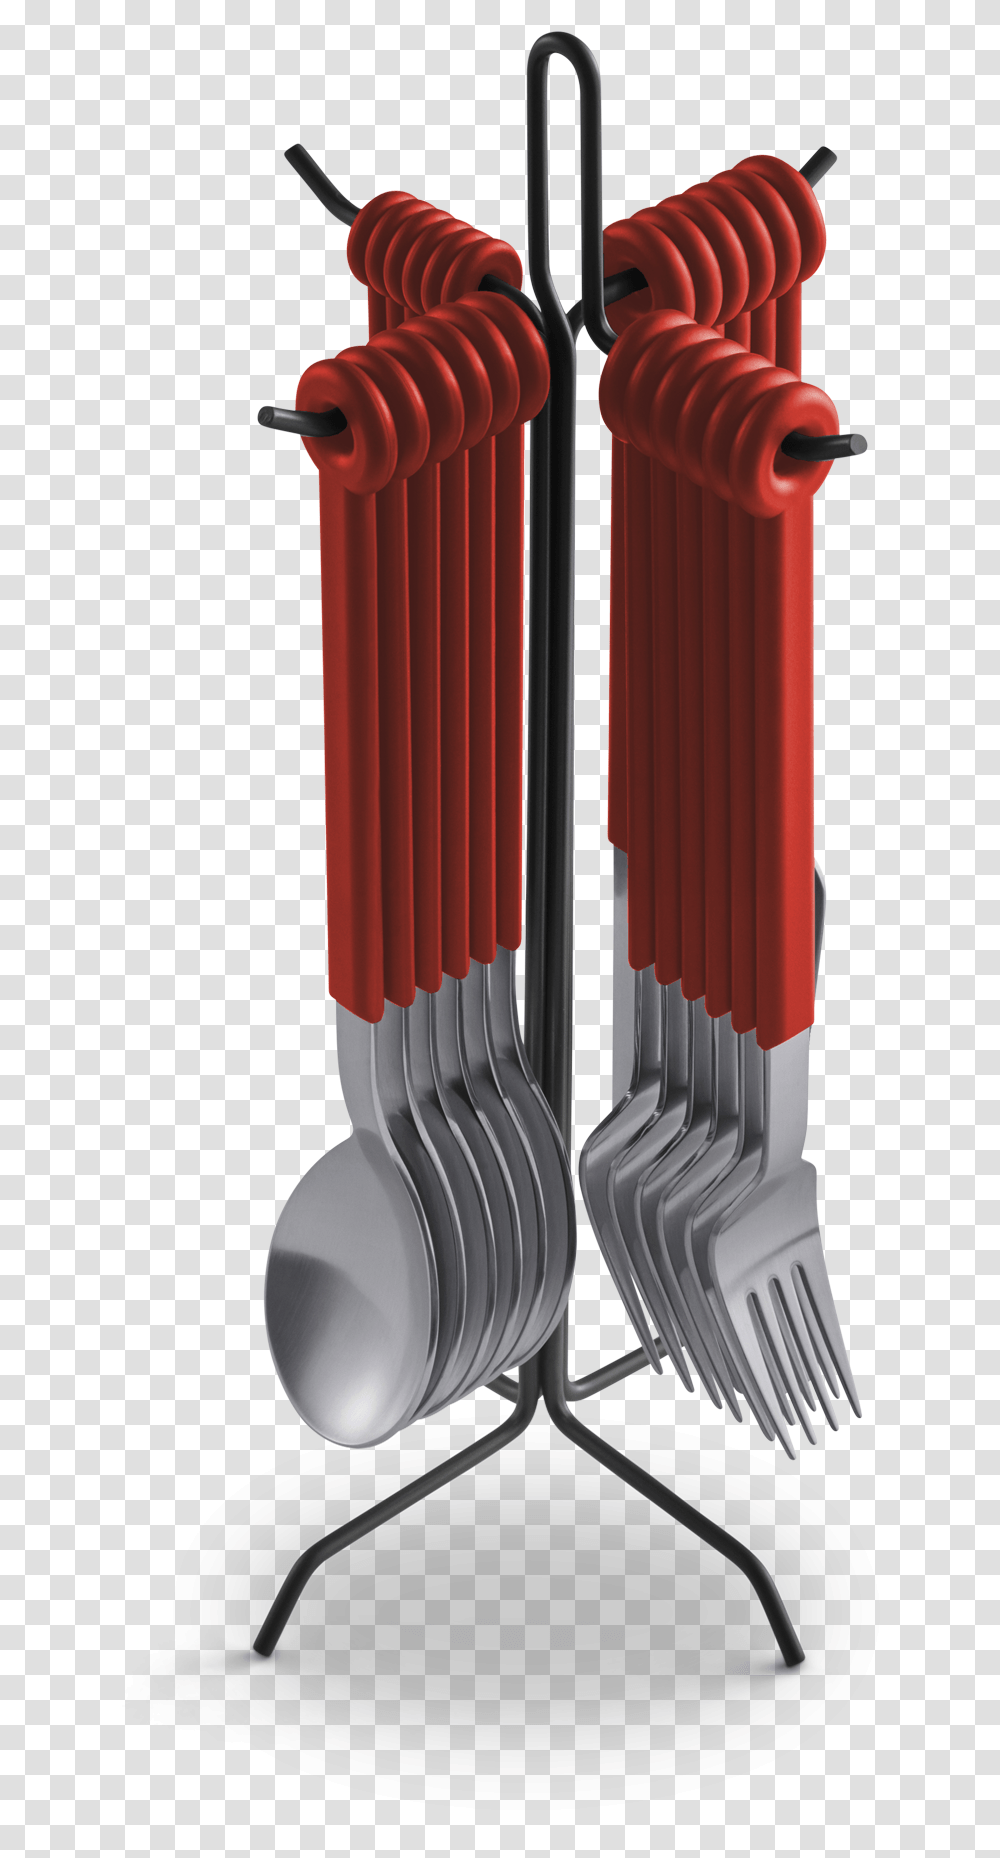 Mono Ring Flatware Set 24 Stand Red, Cutlery, Spoon, Fork Transparent Png